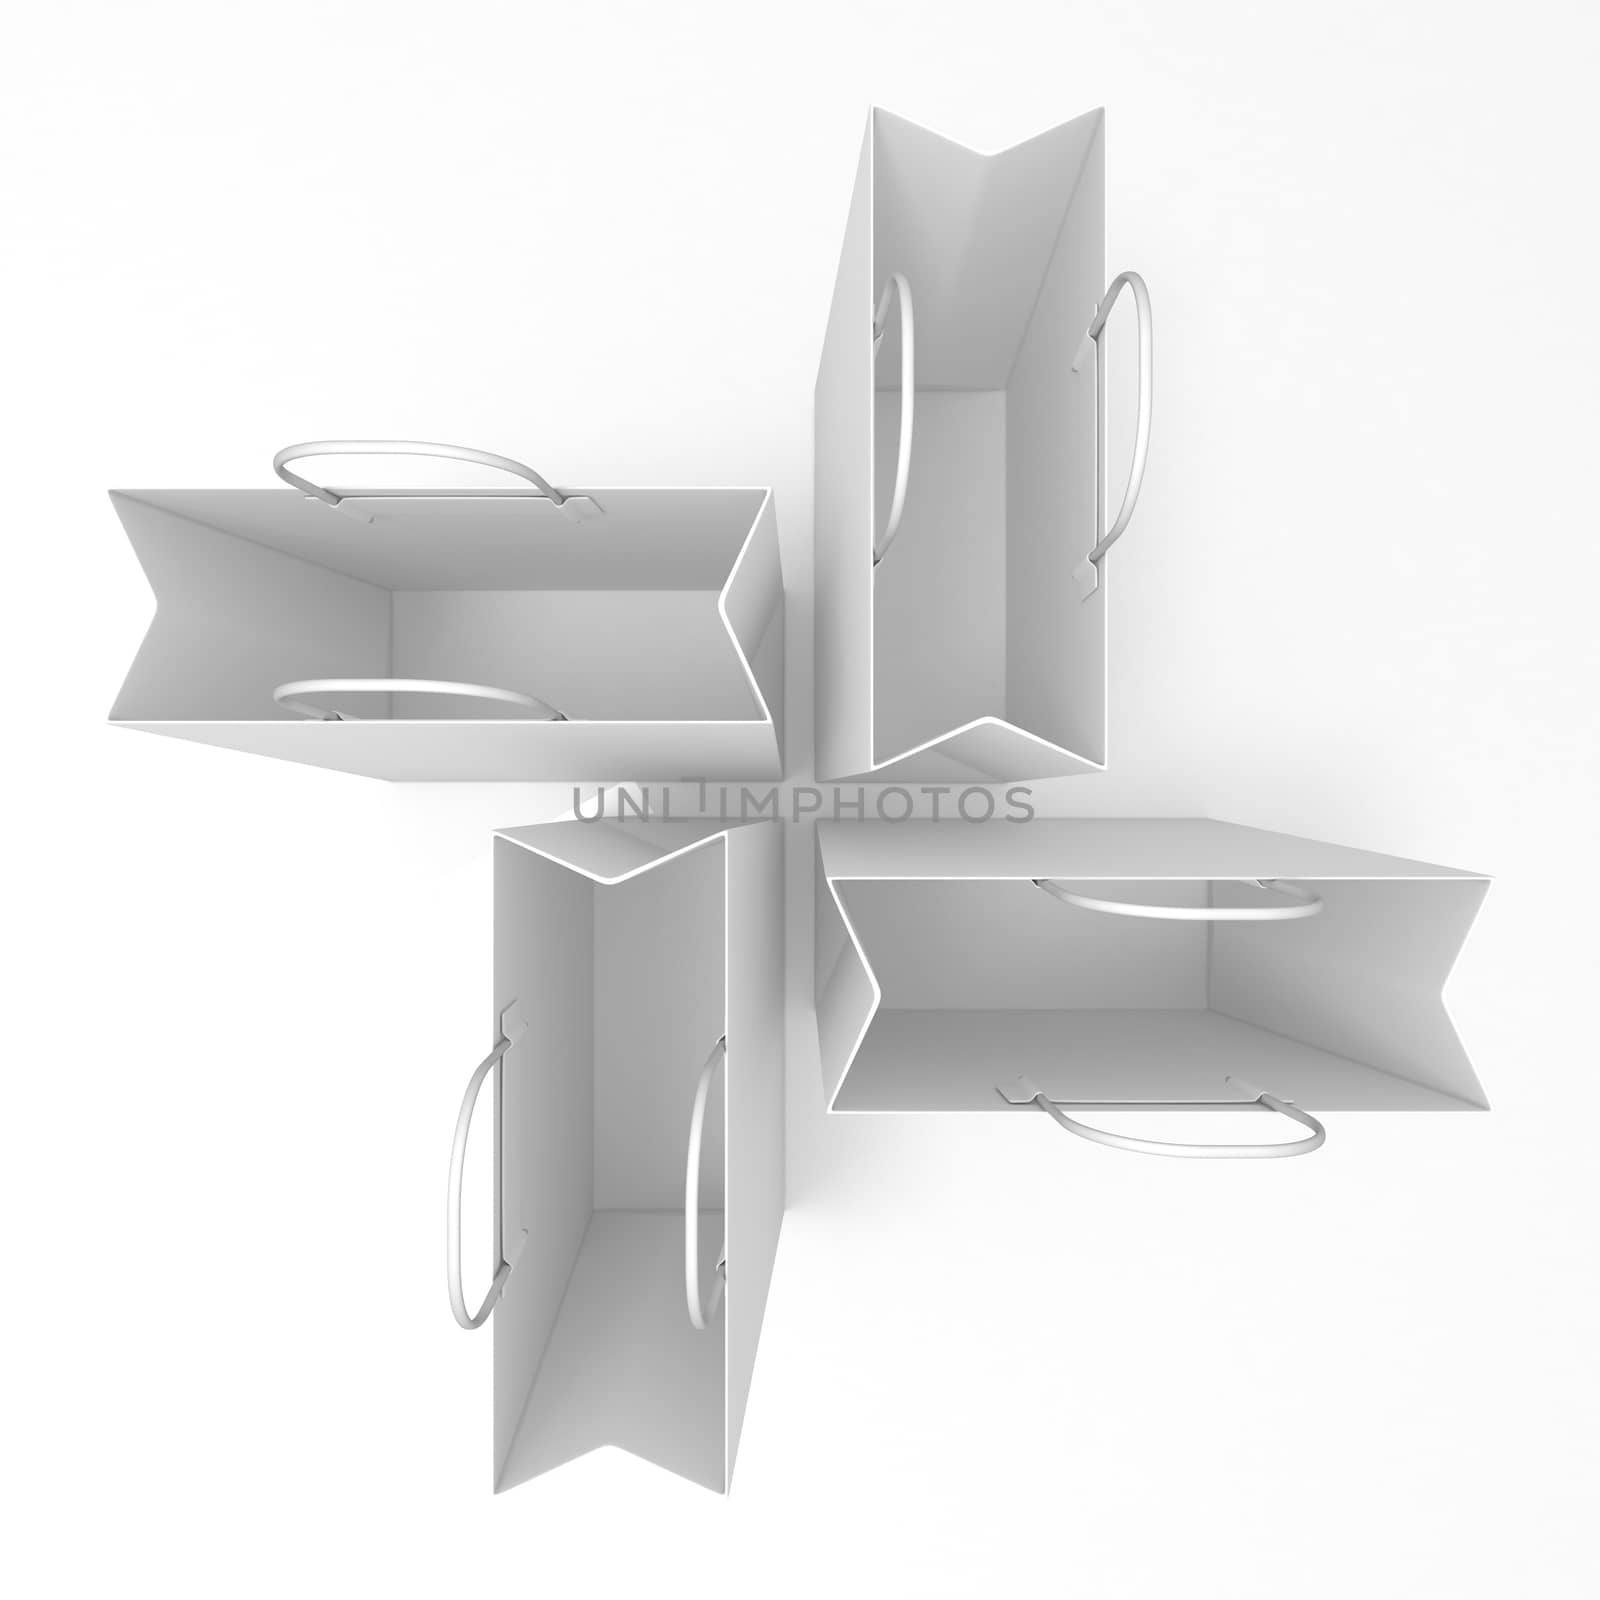 Empty shopping paper bags, arranged and isolated on white. Top view